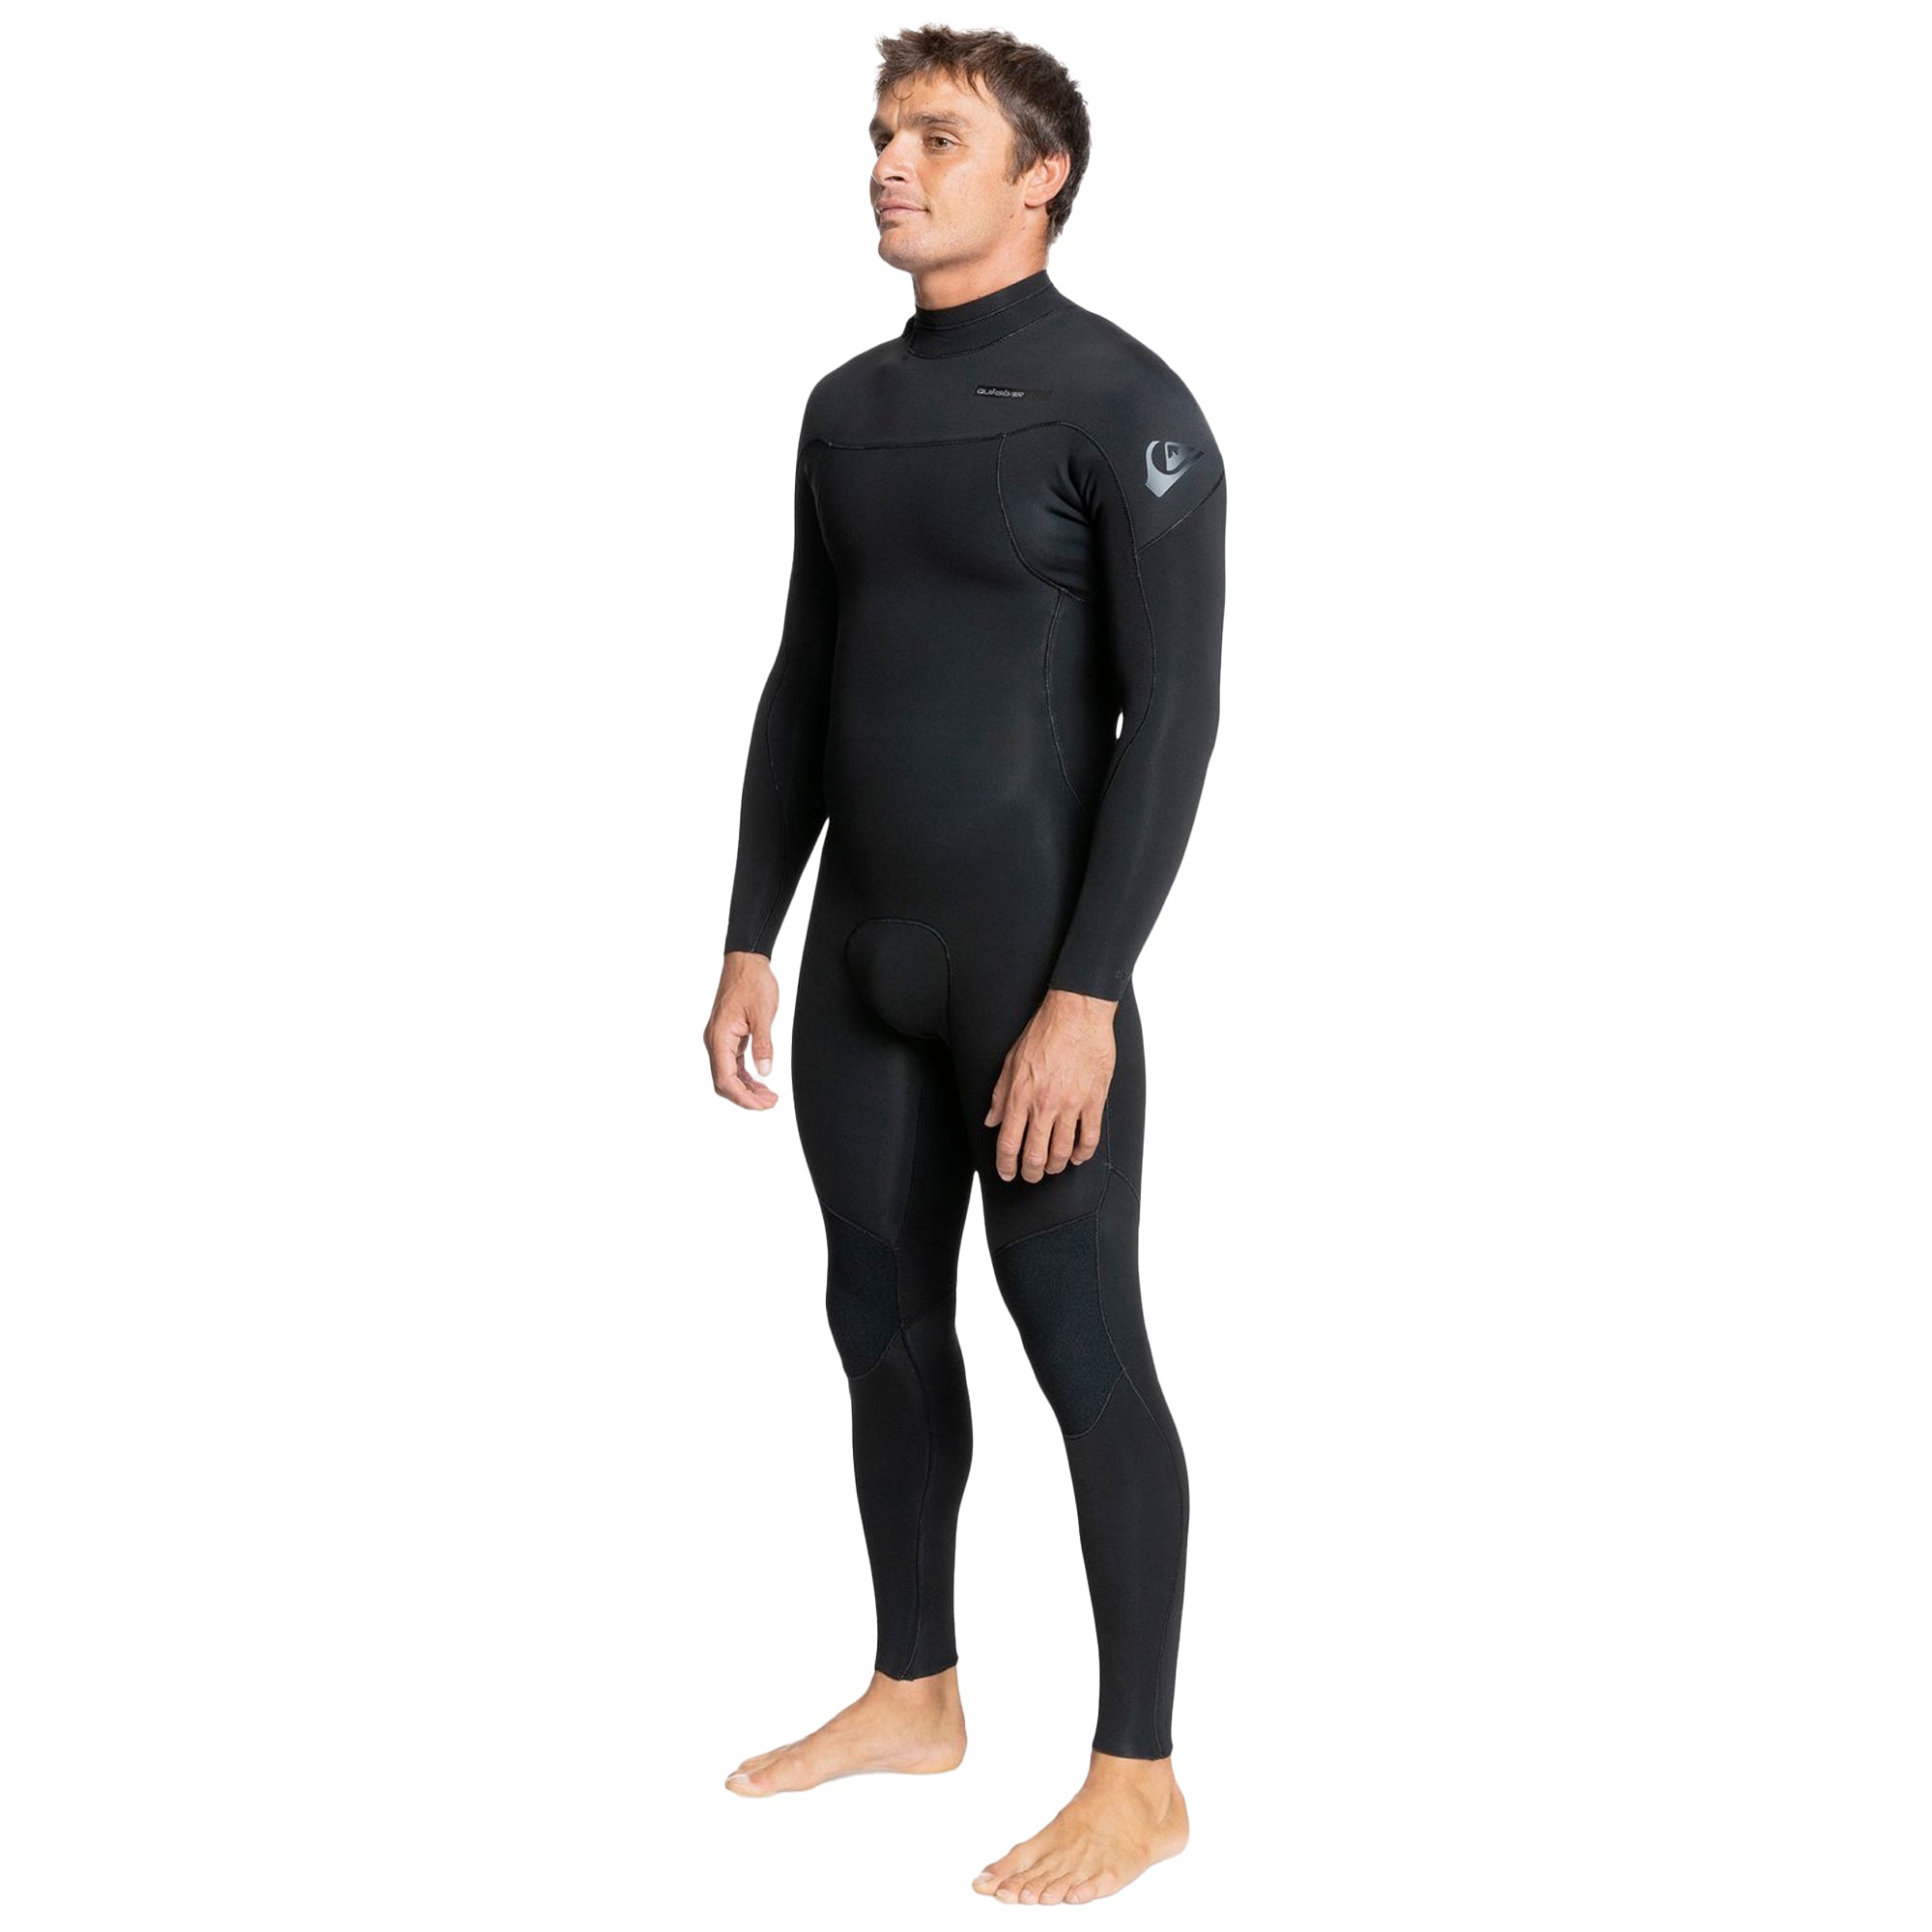 Quiksilver 3/2 Every Day Sessions Men's Back-Zip Wetsuit